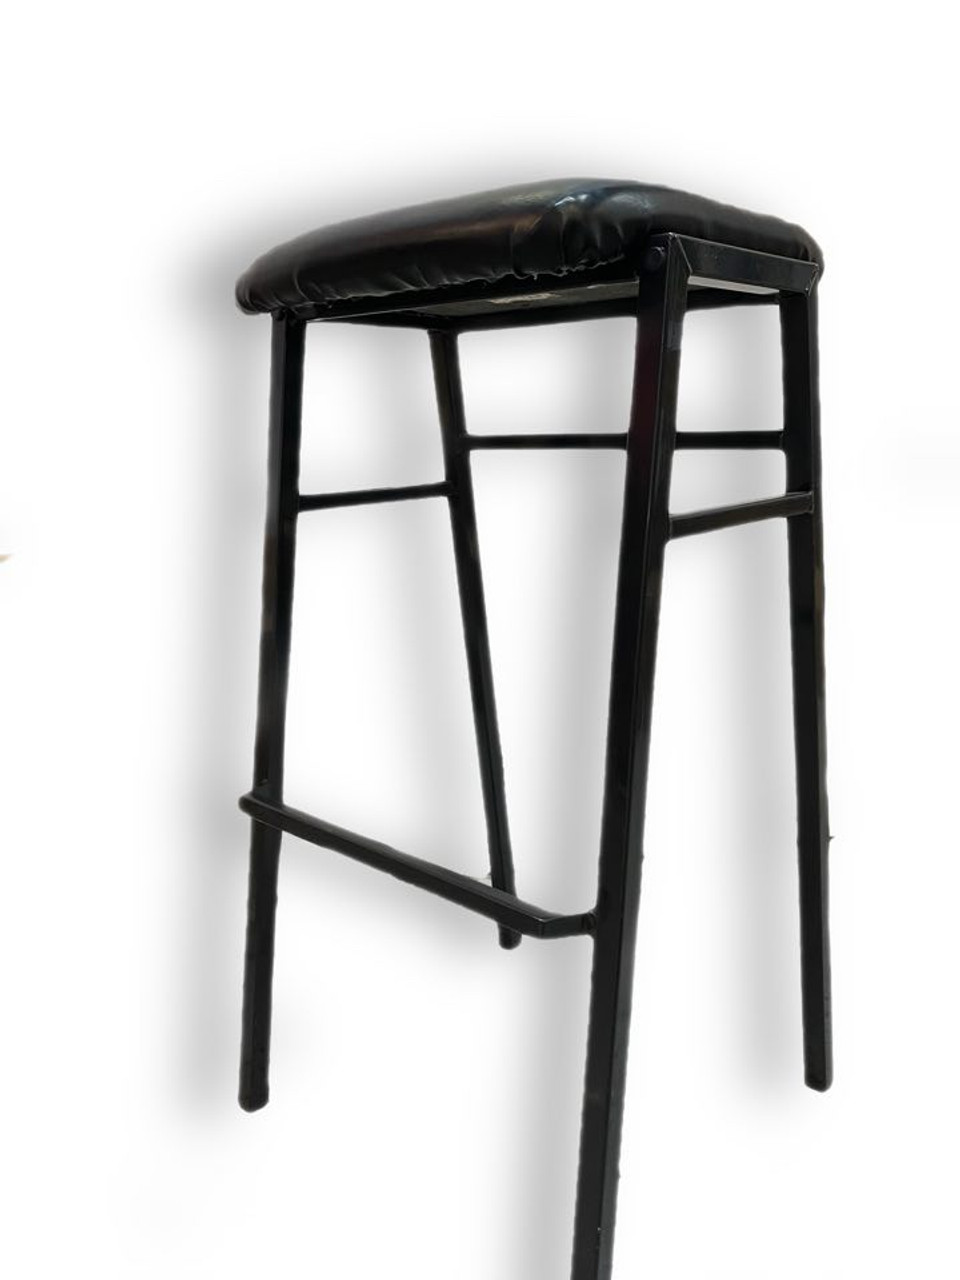 Padded Seat  Bar Stools - Black. HIRE ONLY. PERTH METRO DELIVERY ONLY OR STORE PICK UP.